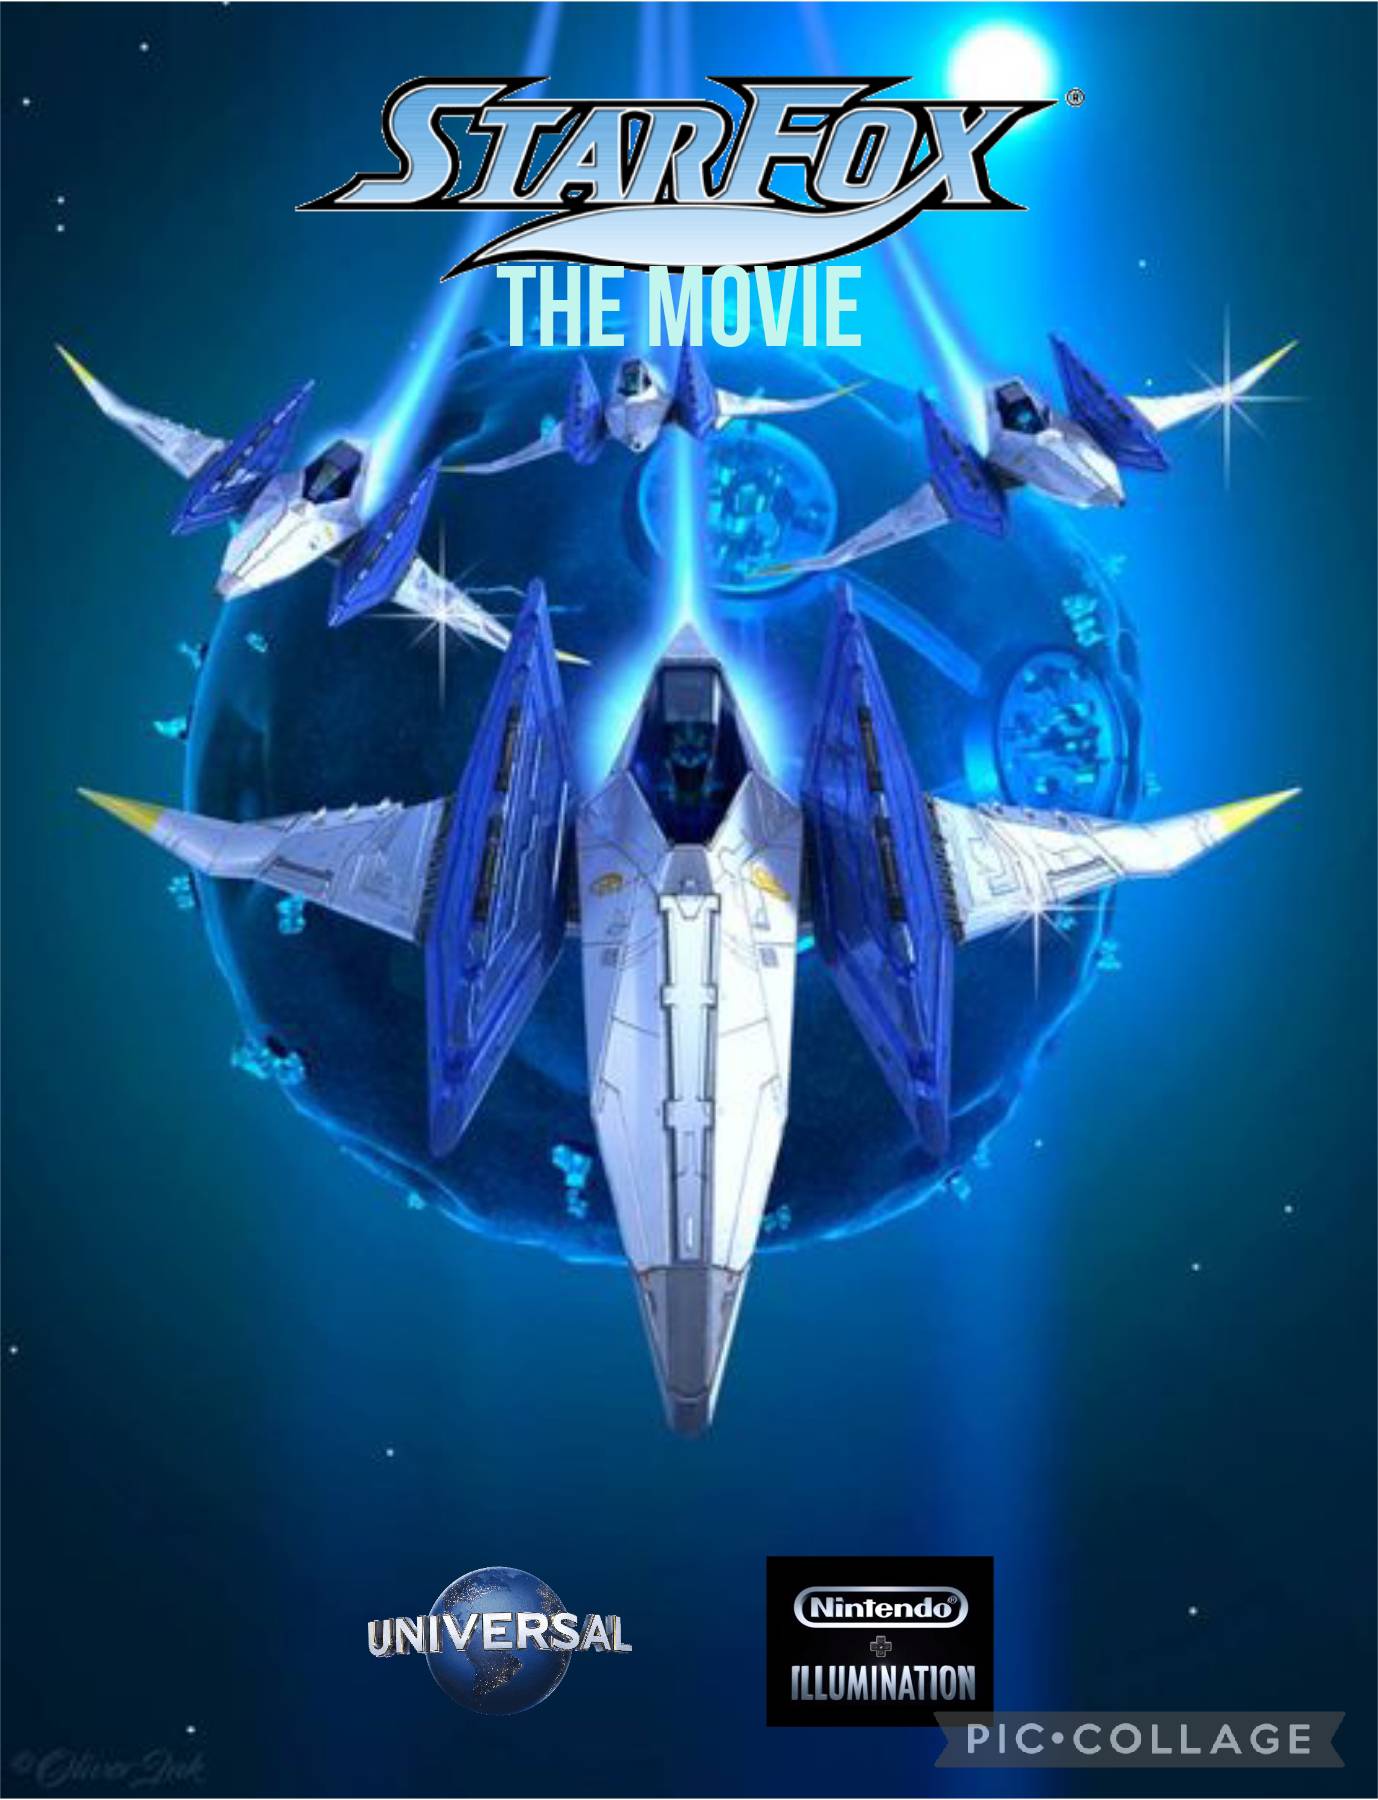 Mission Space (2023) Official Poster by xXMCUFan2020Xx on DeviantArt